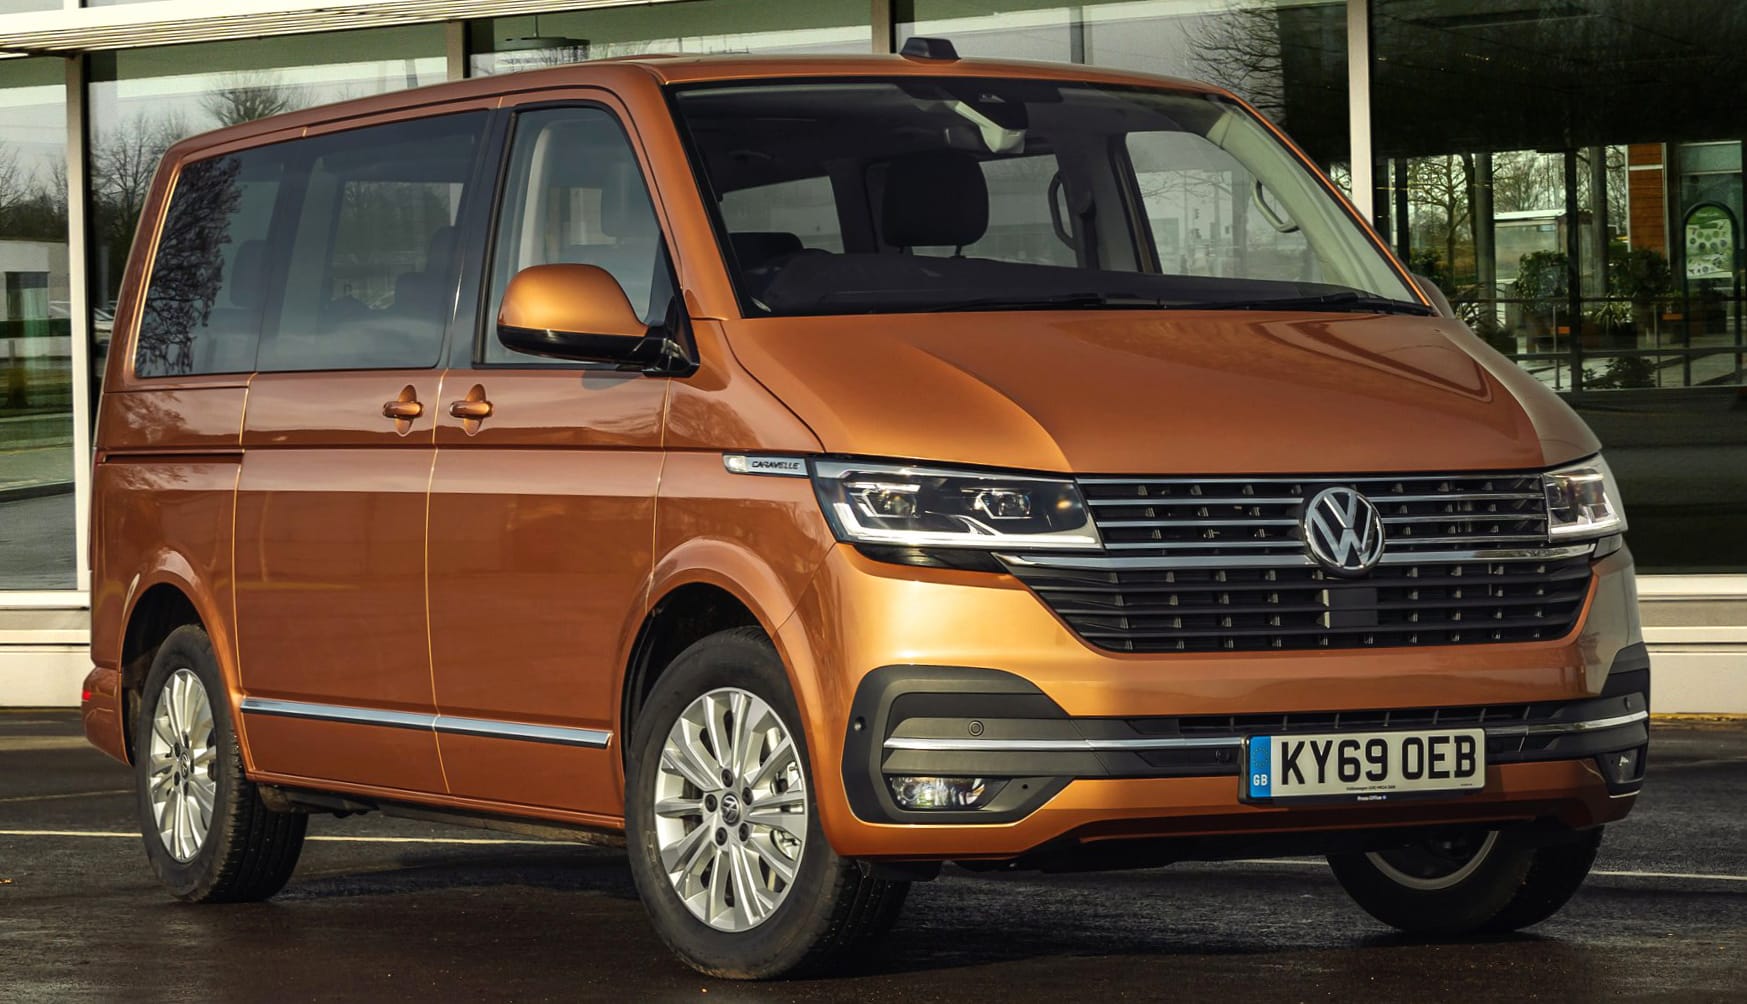 Volkswagen Caravelle wallpapers HD quality